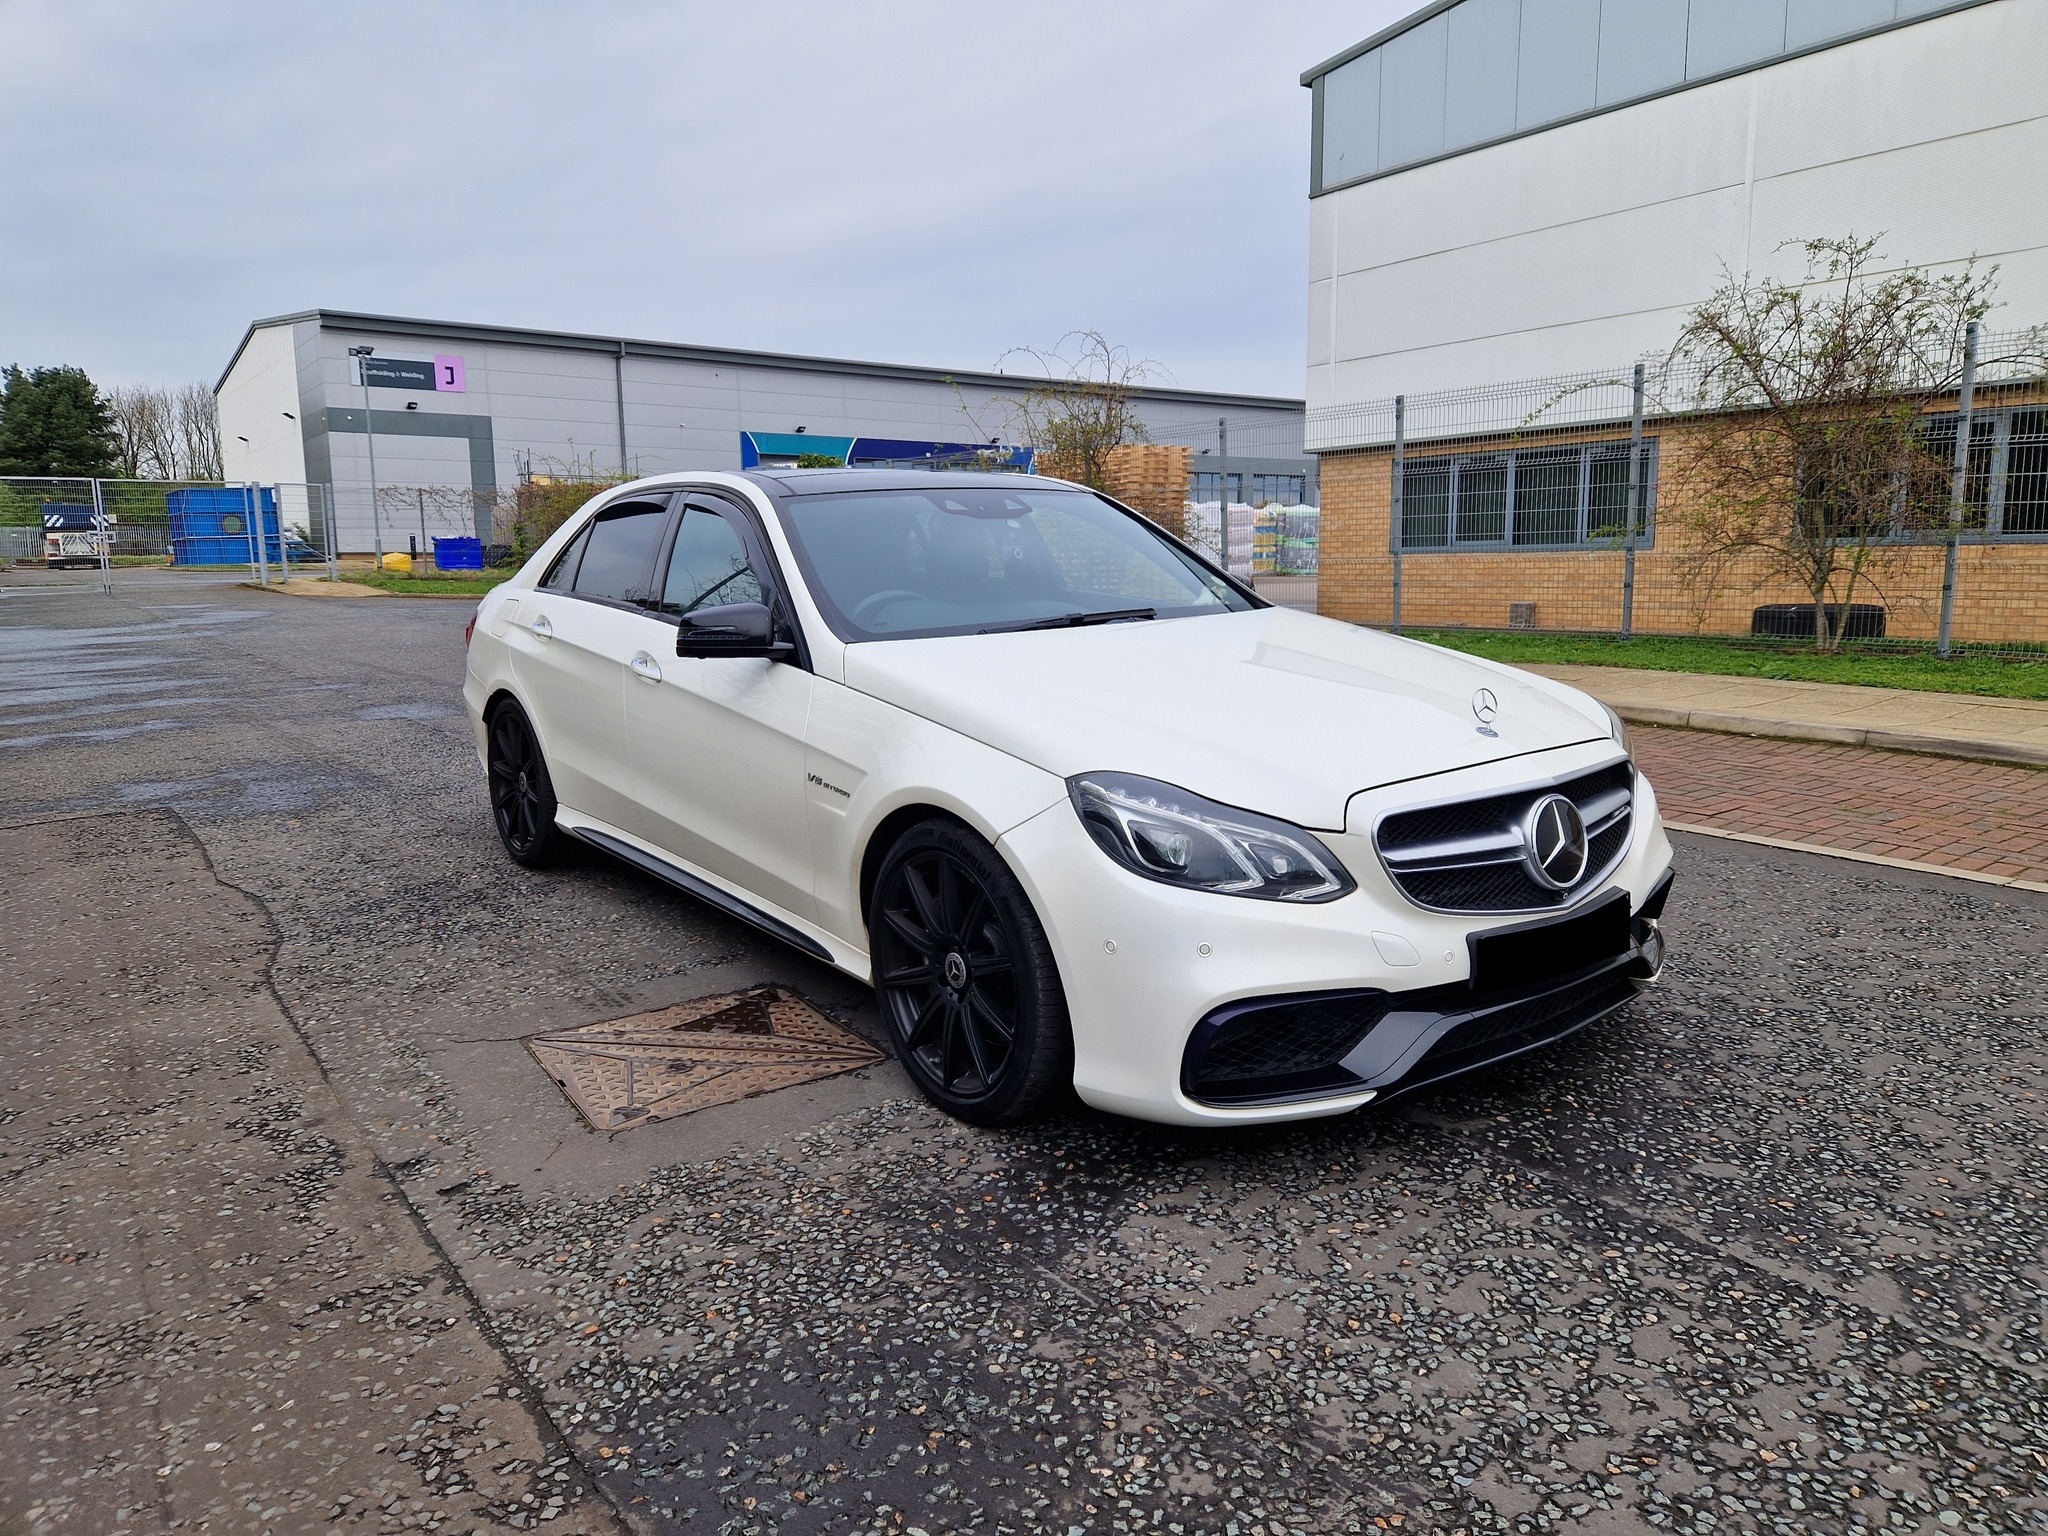 Mercedes E63 AMG 5.5 for stage 1 tune